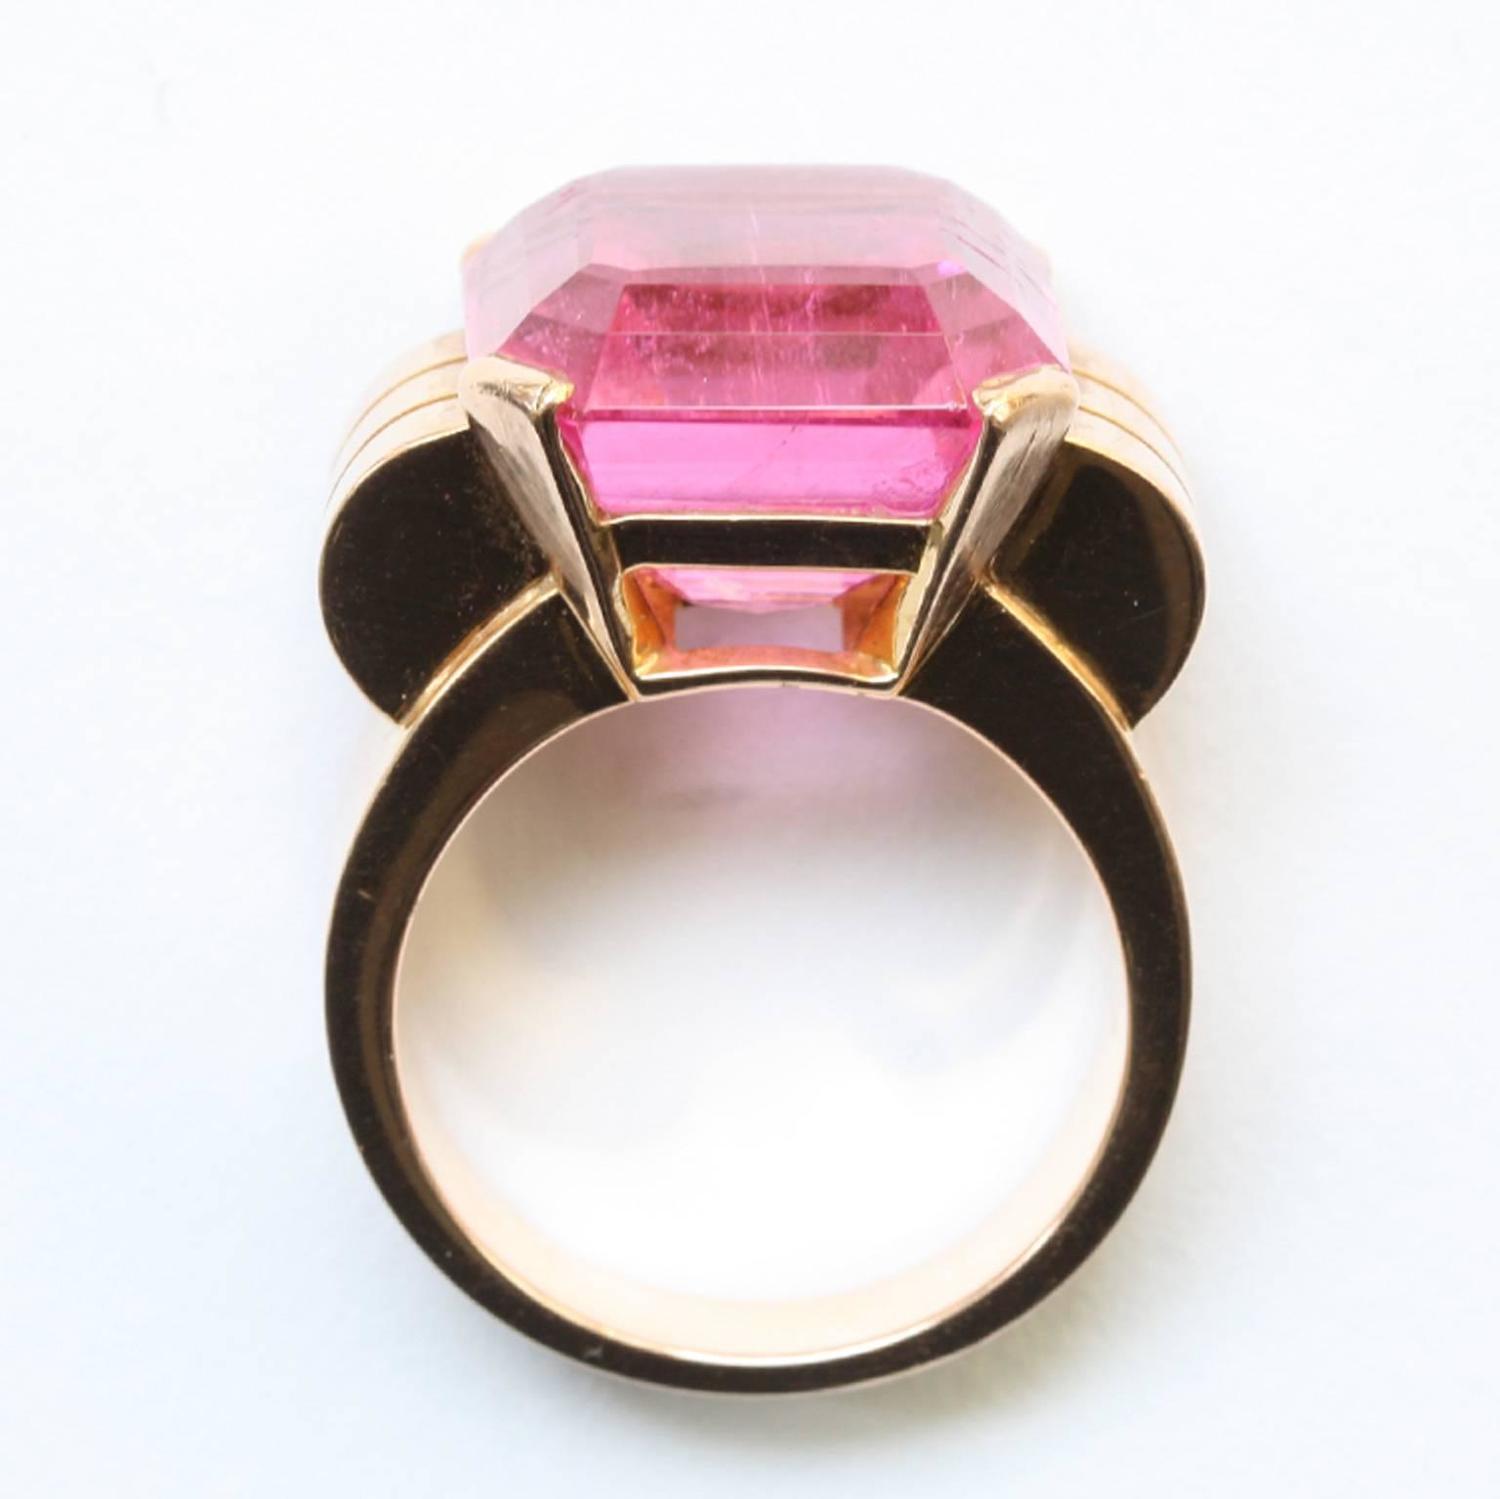 Art Deco Pink Tourmaline Gold Ring For Sale at 1stdibs